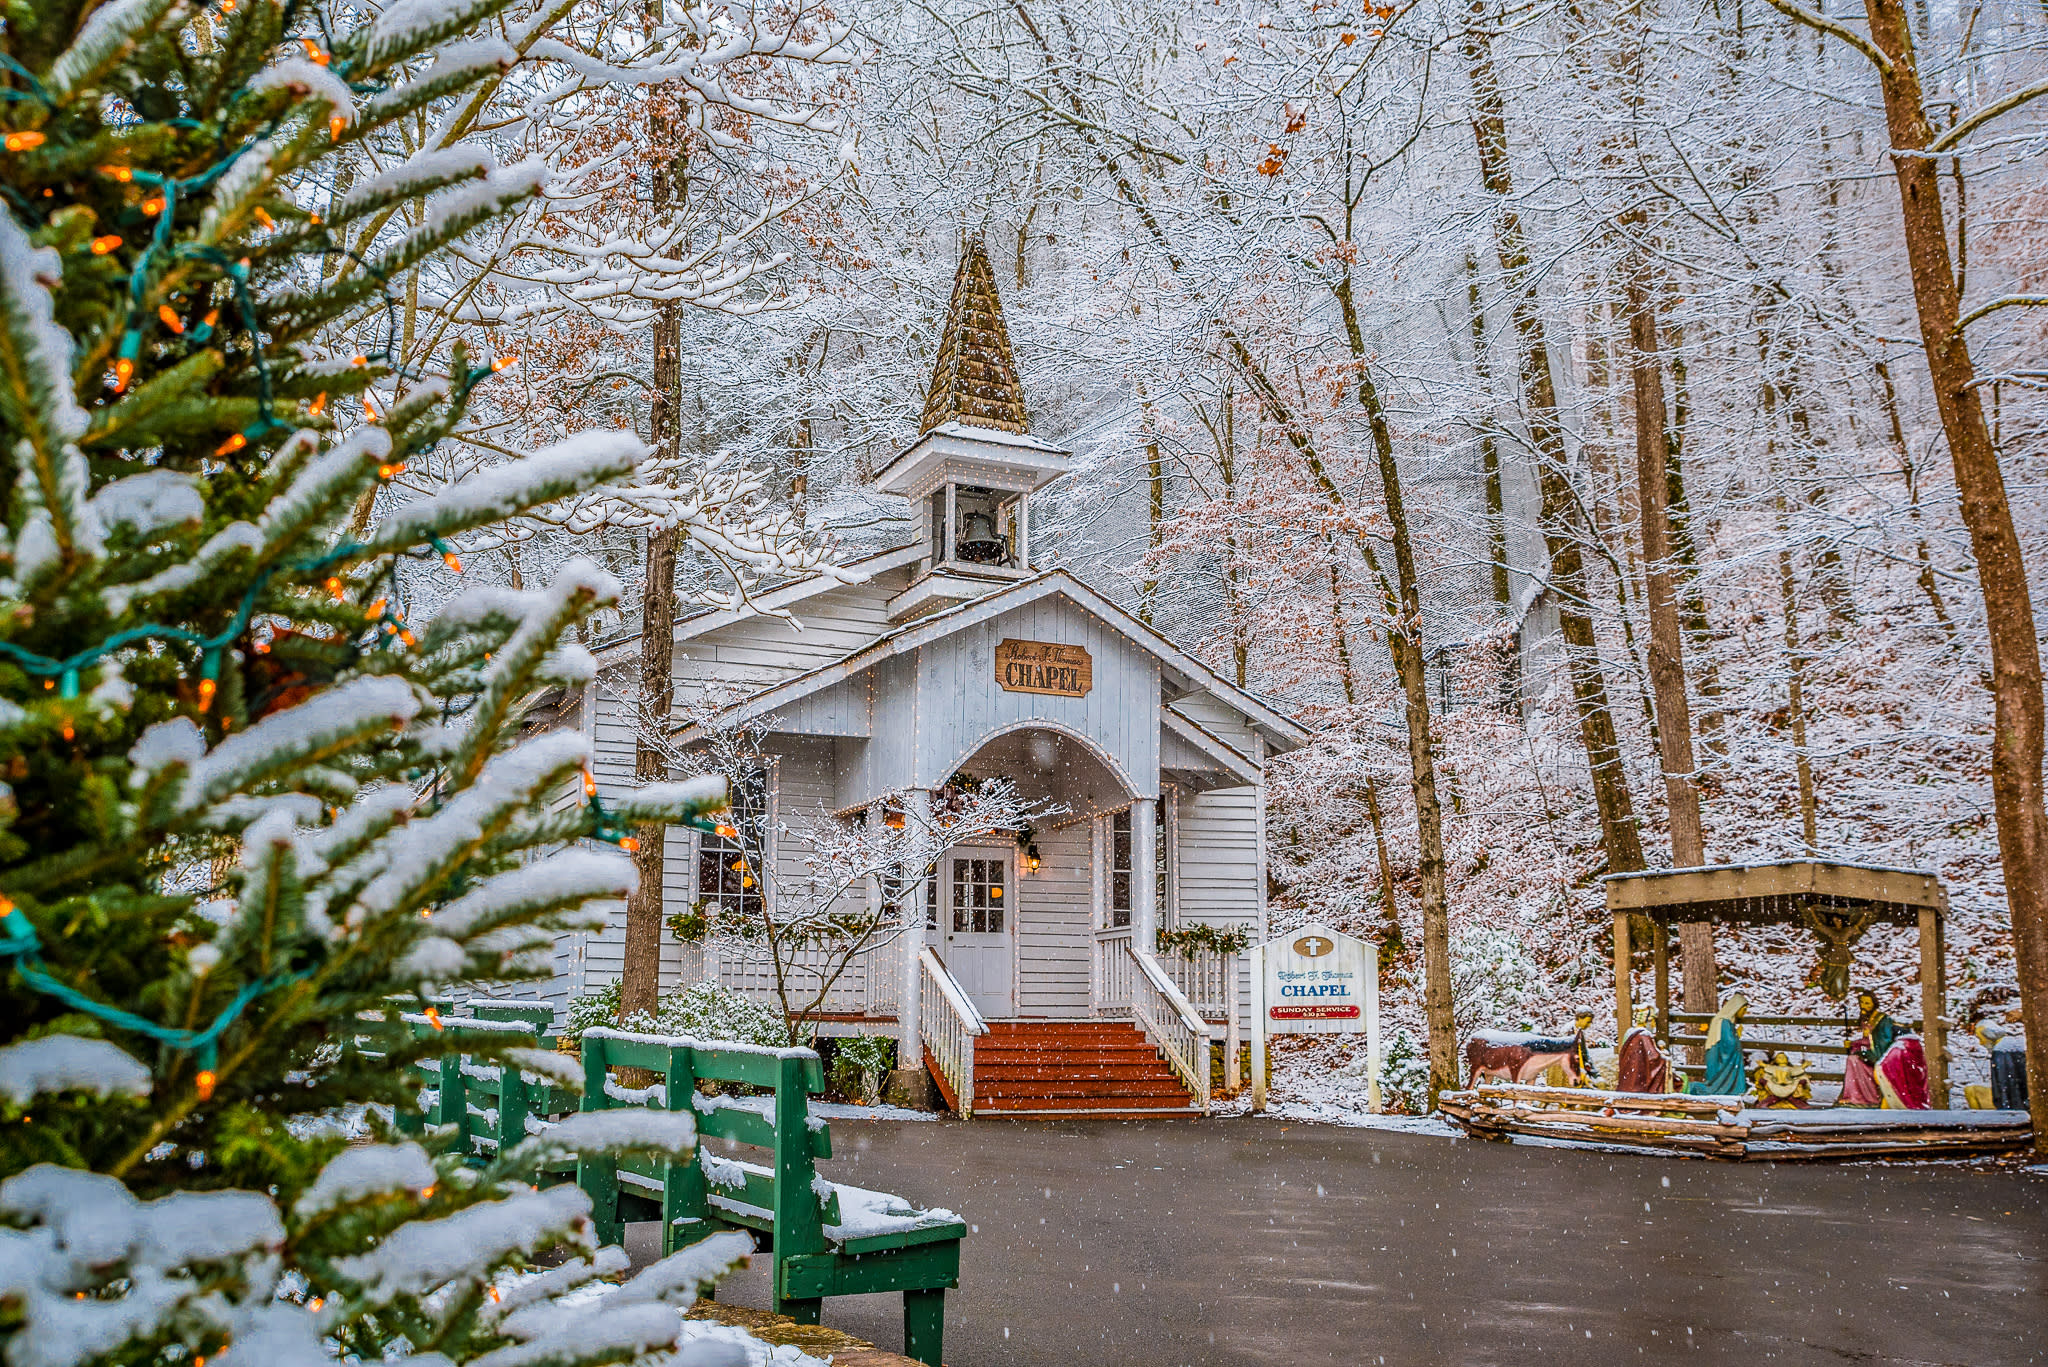 Dollywood’s Smoky Mountain Christmas Is the MustSee Holiday Theme Park